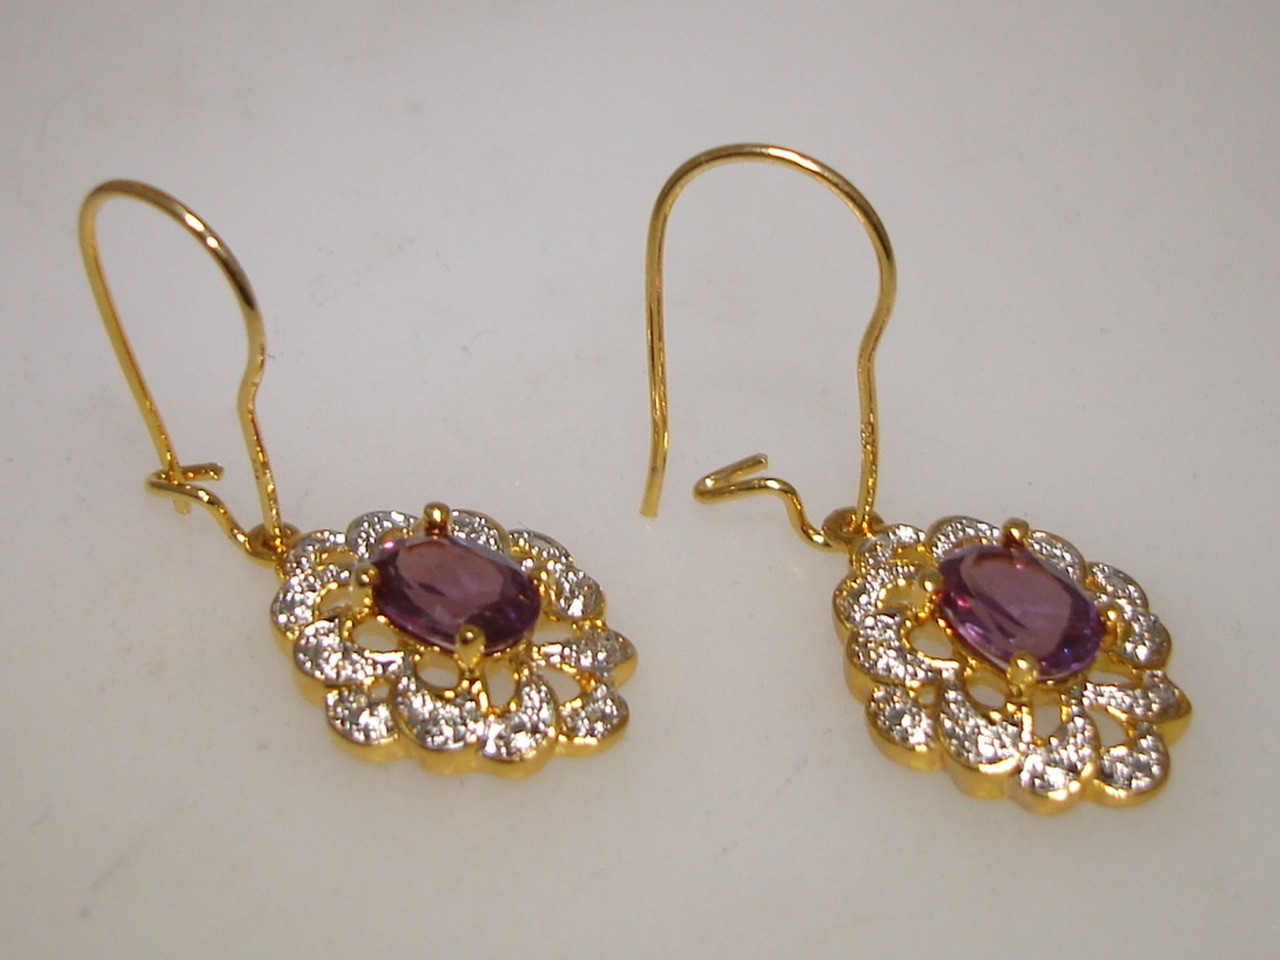 Mystic Fire Topaz Earrings
 BEAUTIFUL STERLING SILVER WITH GOLD WASH MYSTIC FIRE TOPAZ